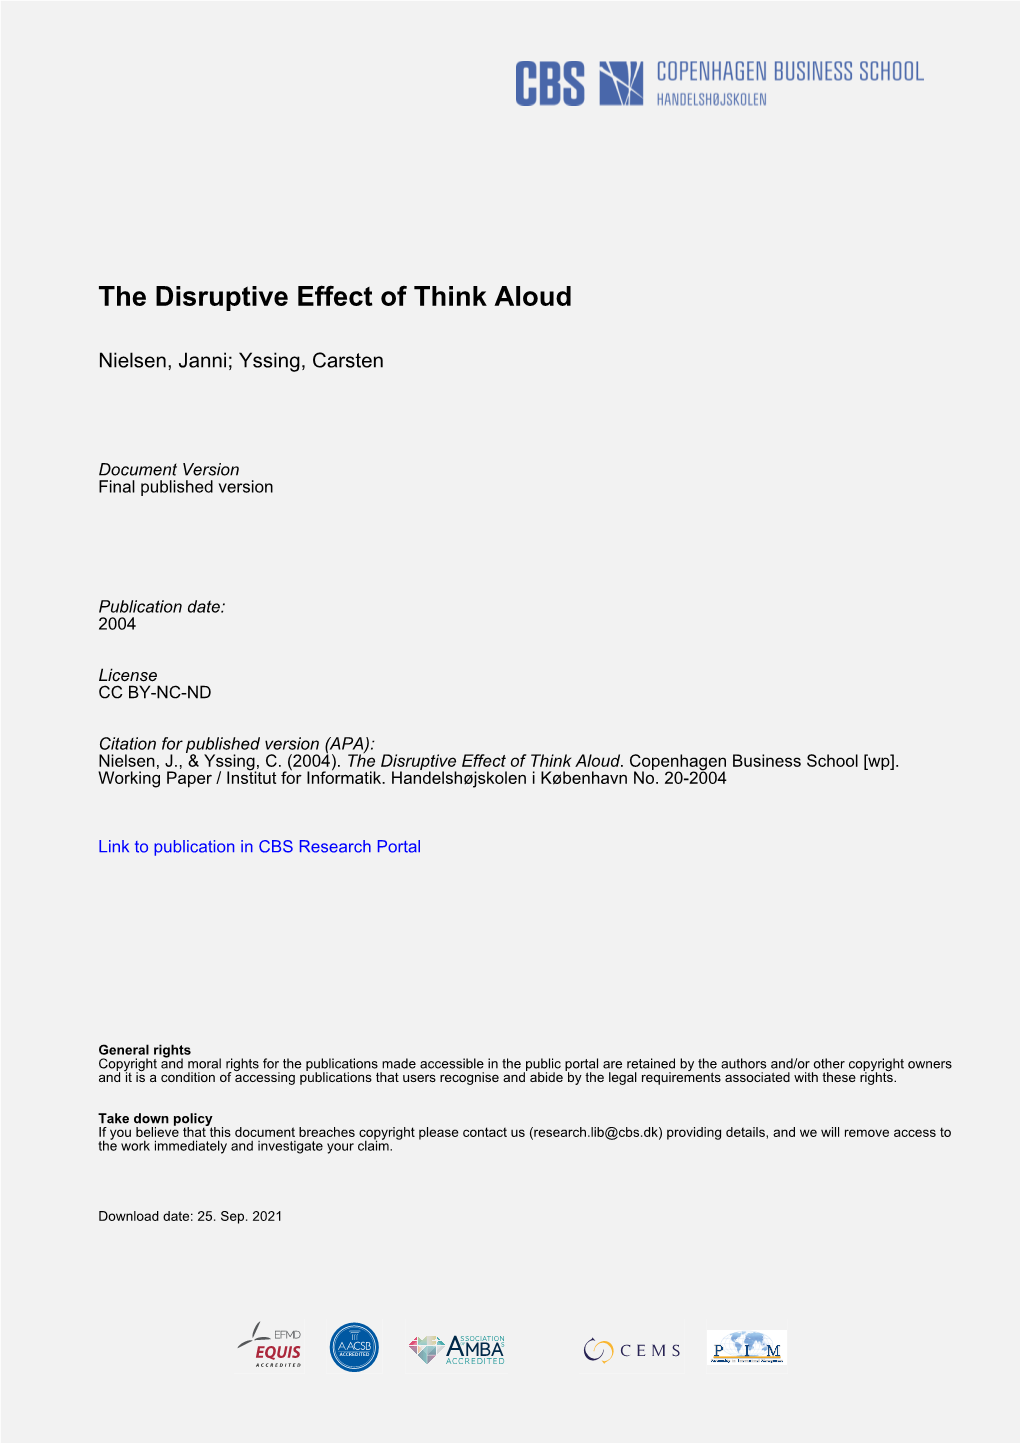 The Disruptive Effect of Think Aloud